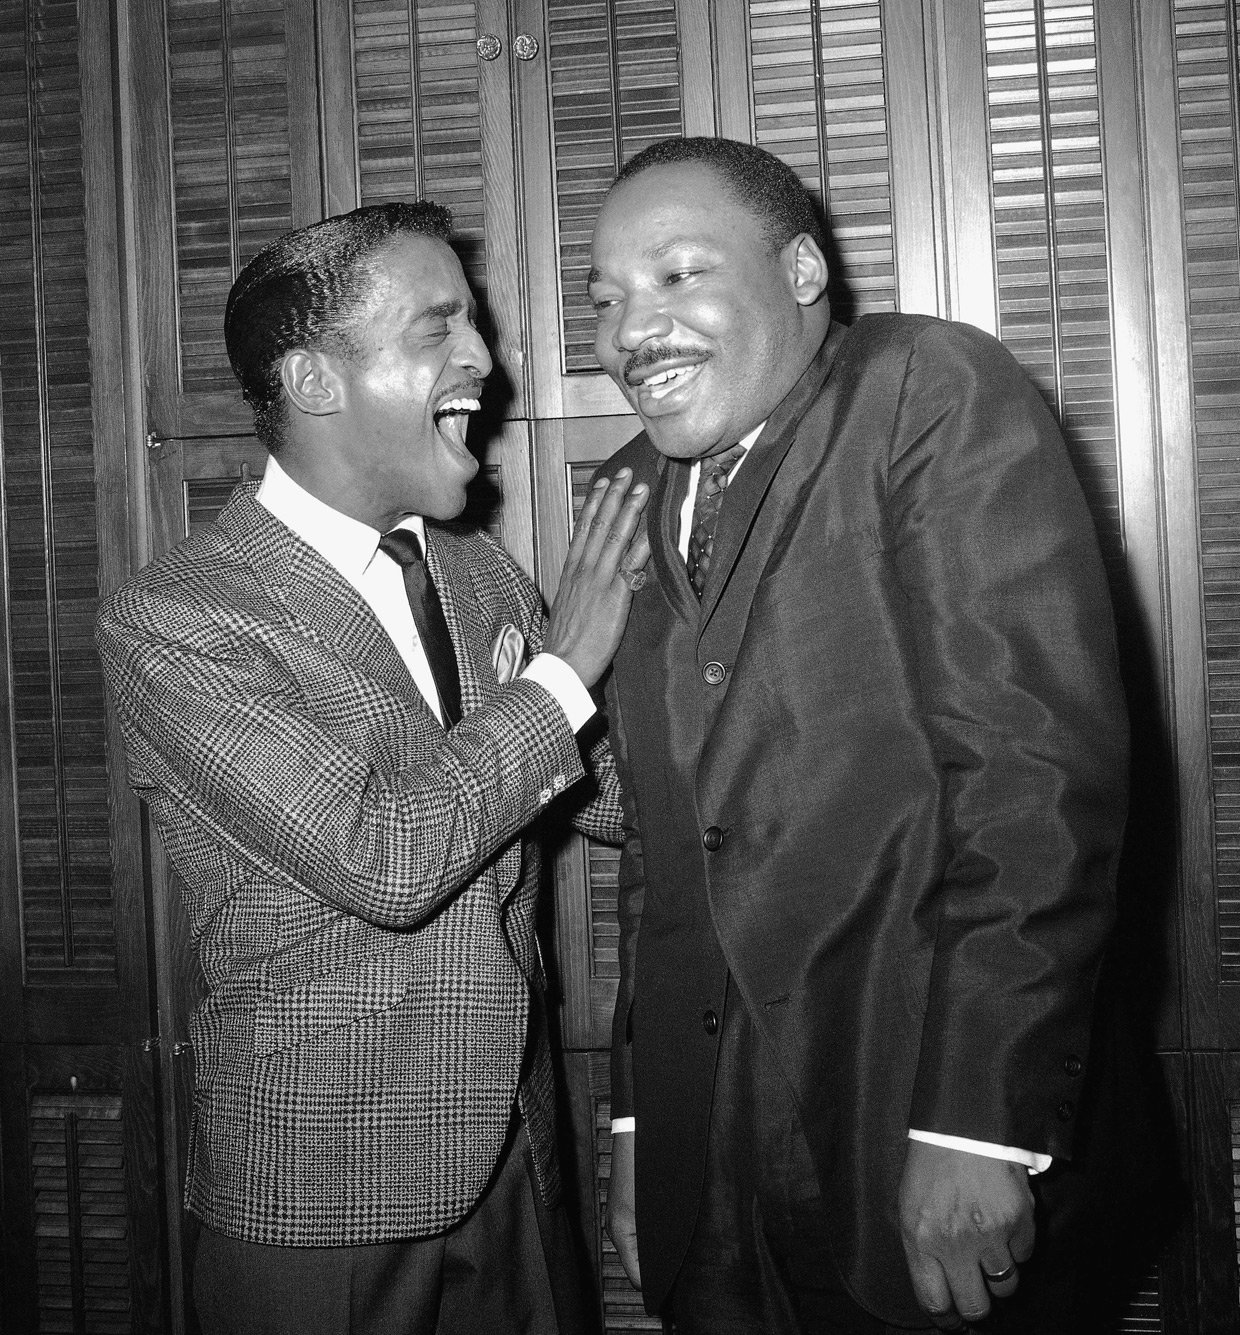 Sammy Davis Jr and Martin Luther King Jr backstage at New York’s Majestic Theatre, 1965